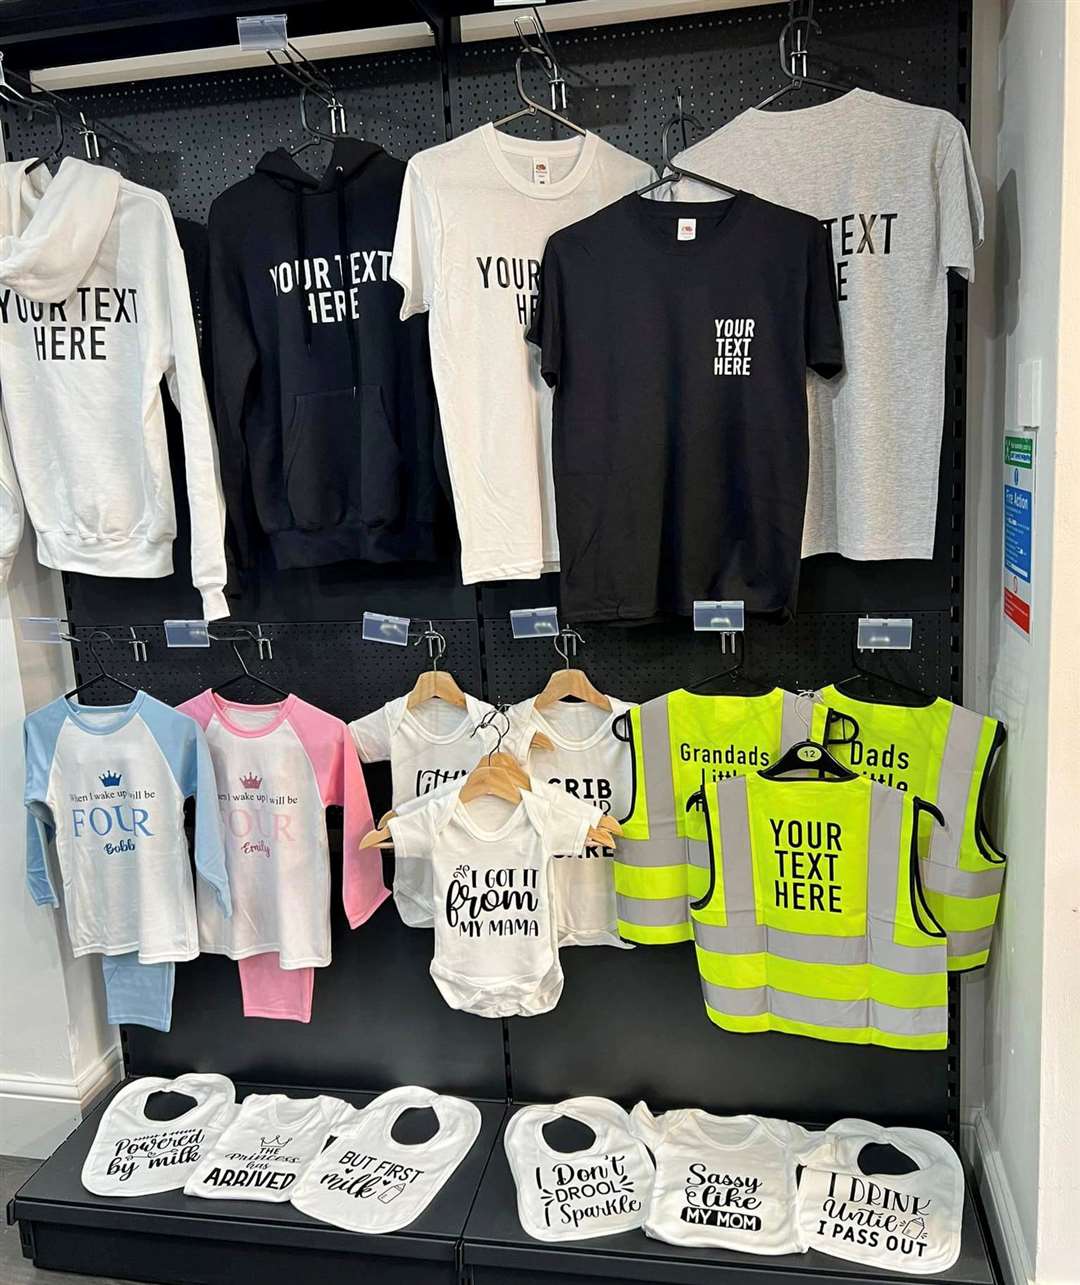 The shop will allow customers to personalise items of clothing with words and logo. Picture: Chloe Delasalle